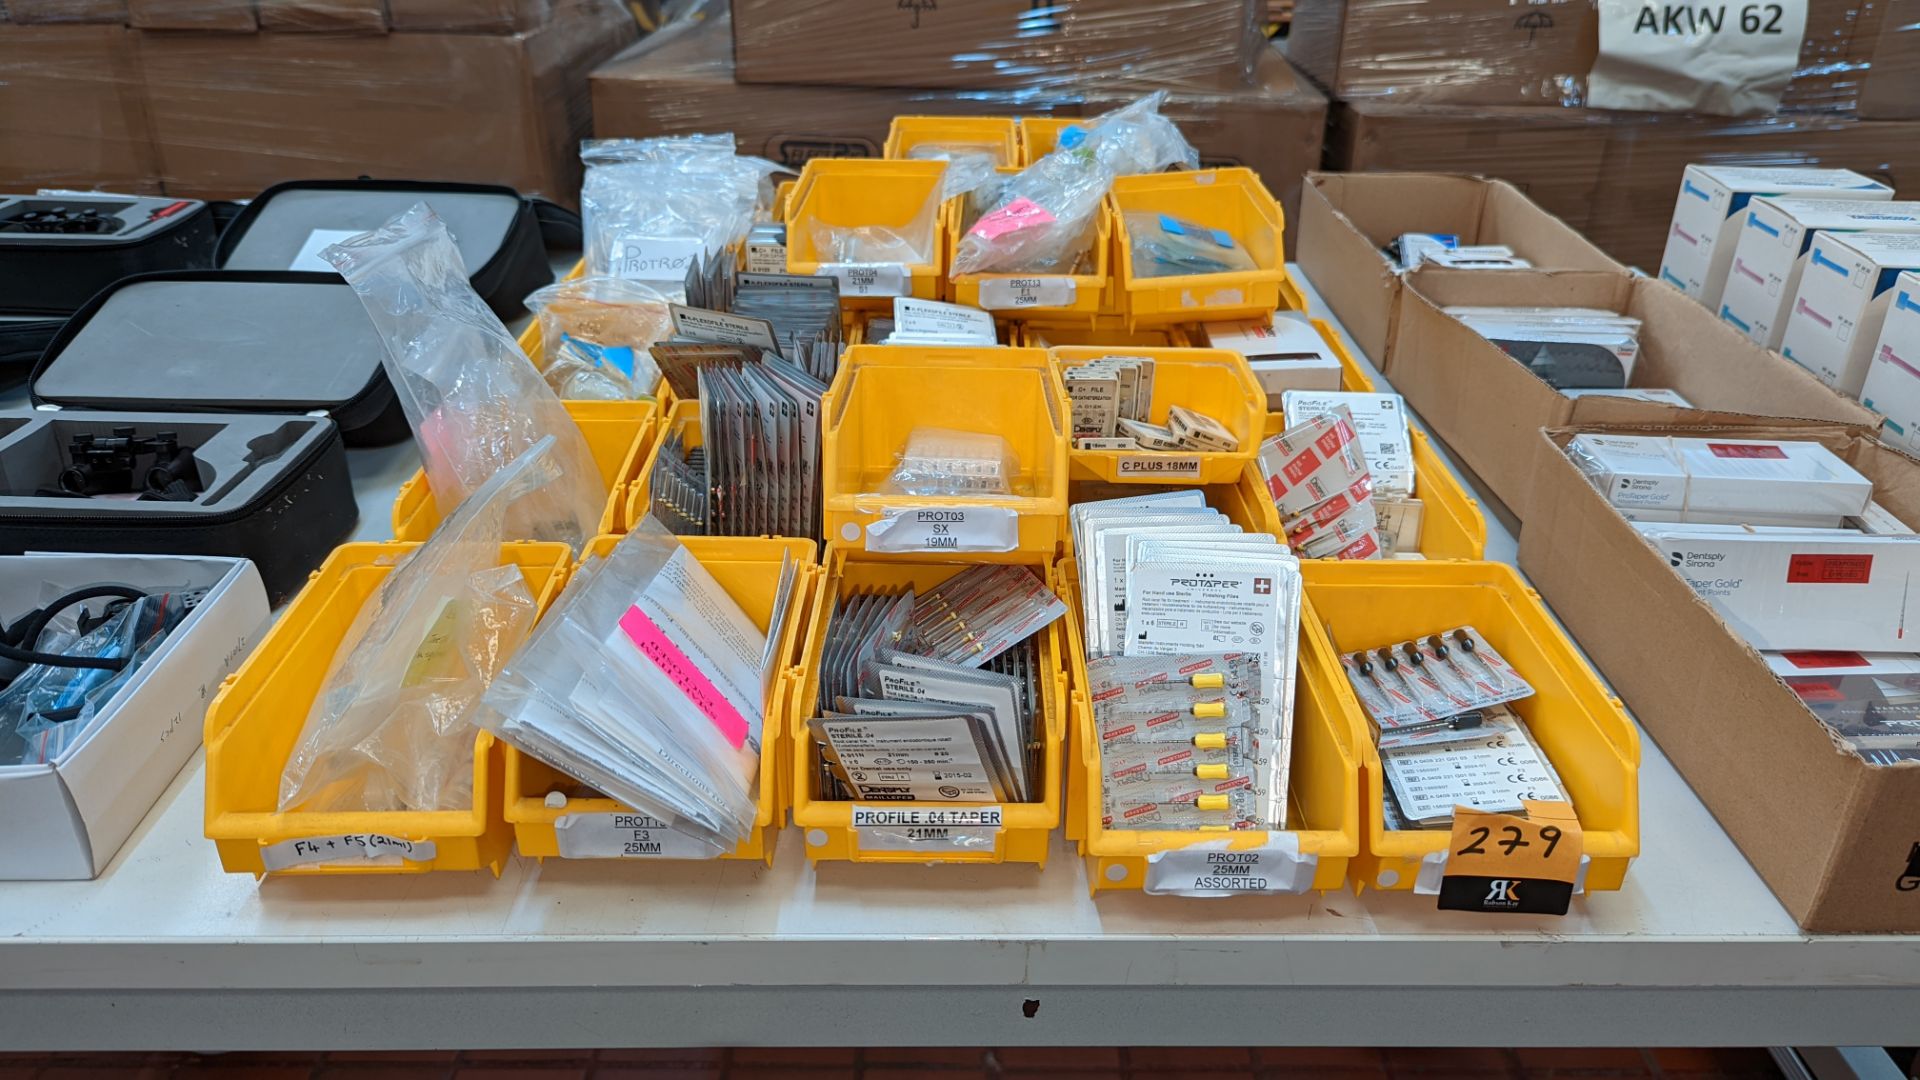 Approximately 30 yellow crates & their contents of assorted dental consumables